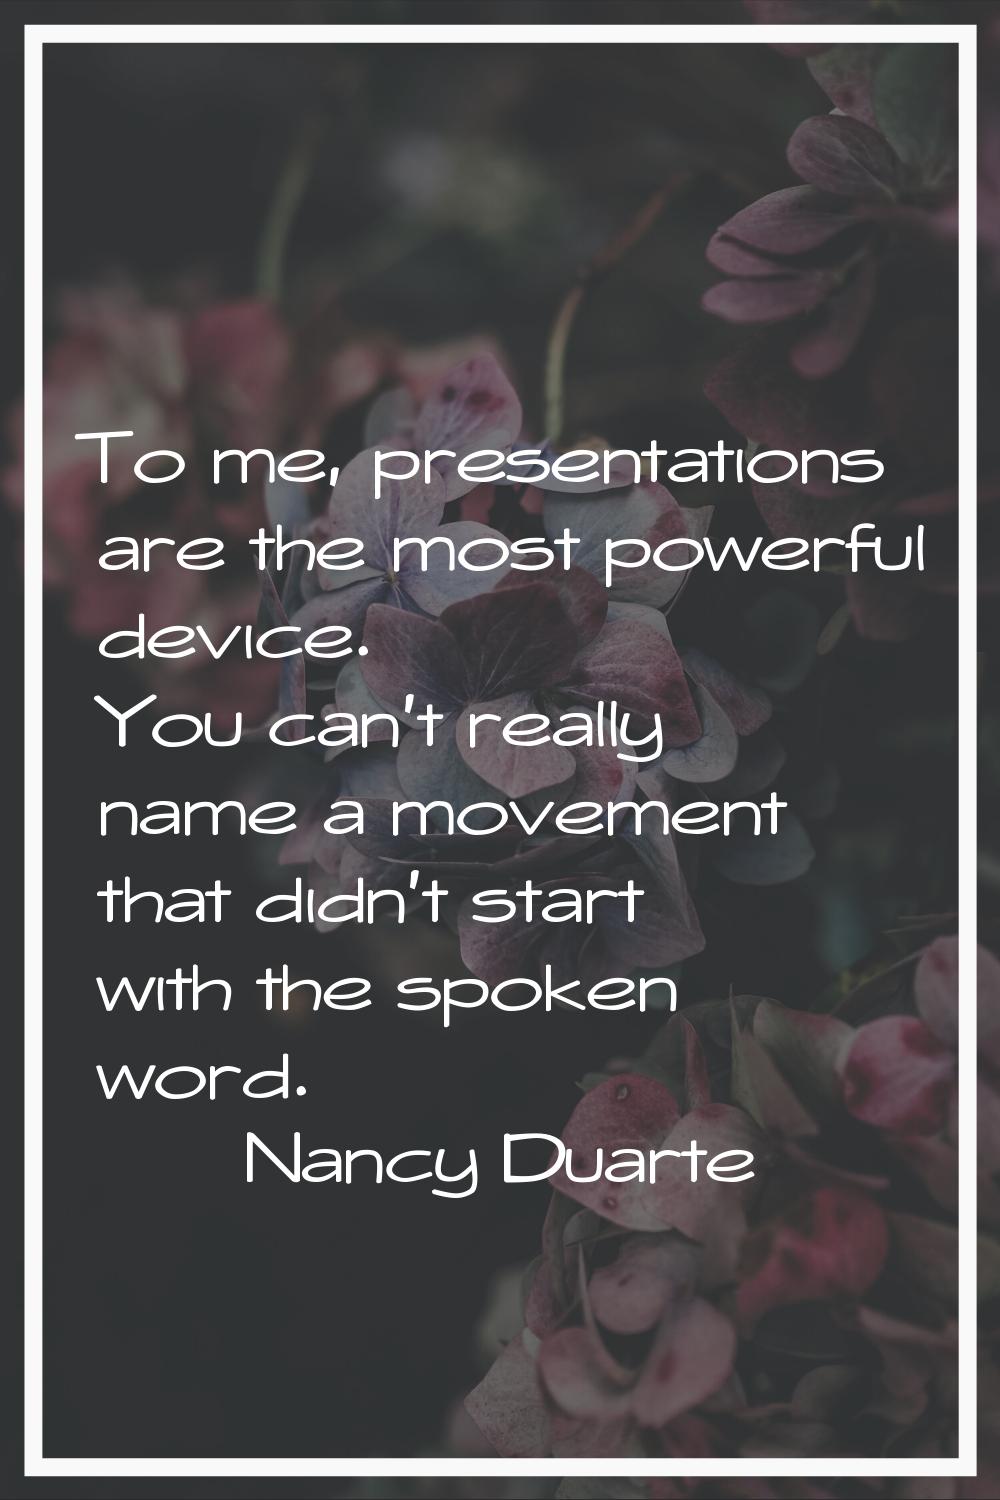 To me, presentations are the most powerful device. You can't really name a movement that didn't sta